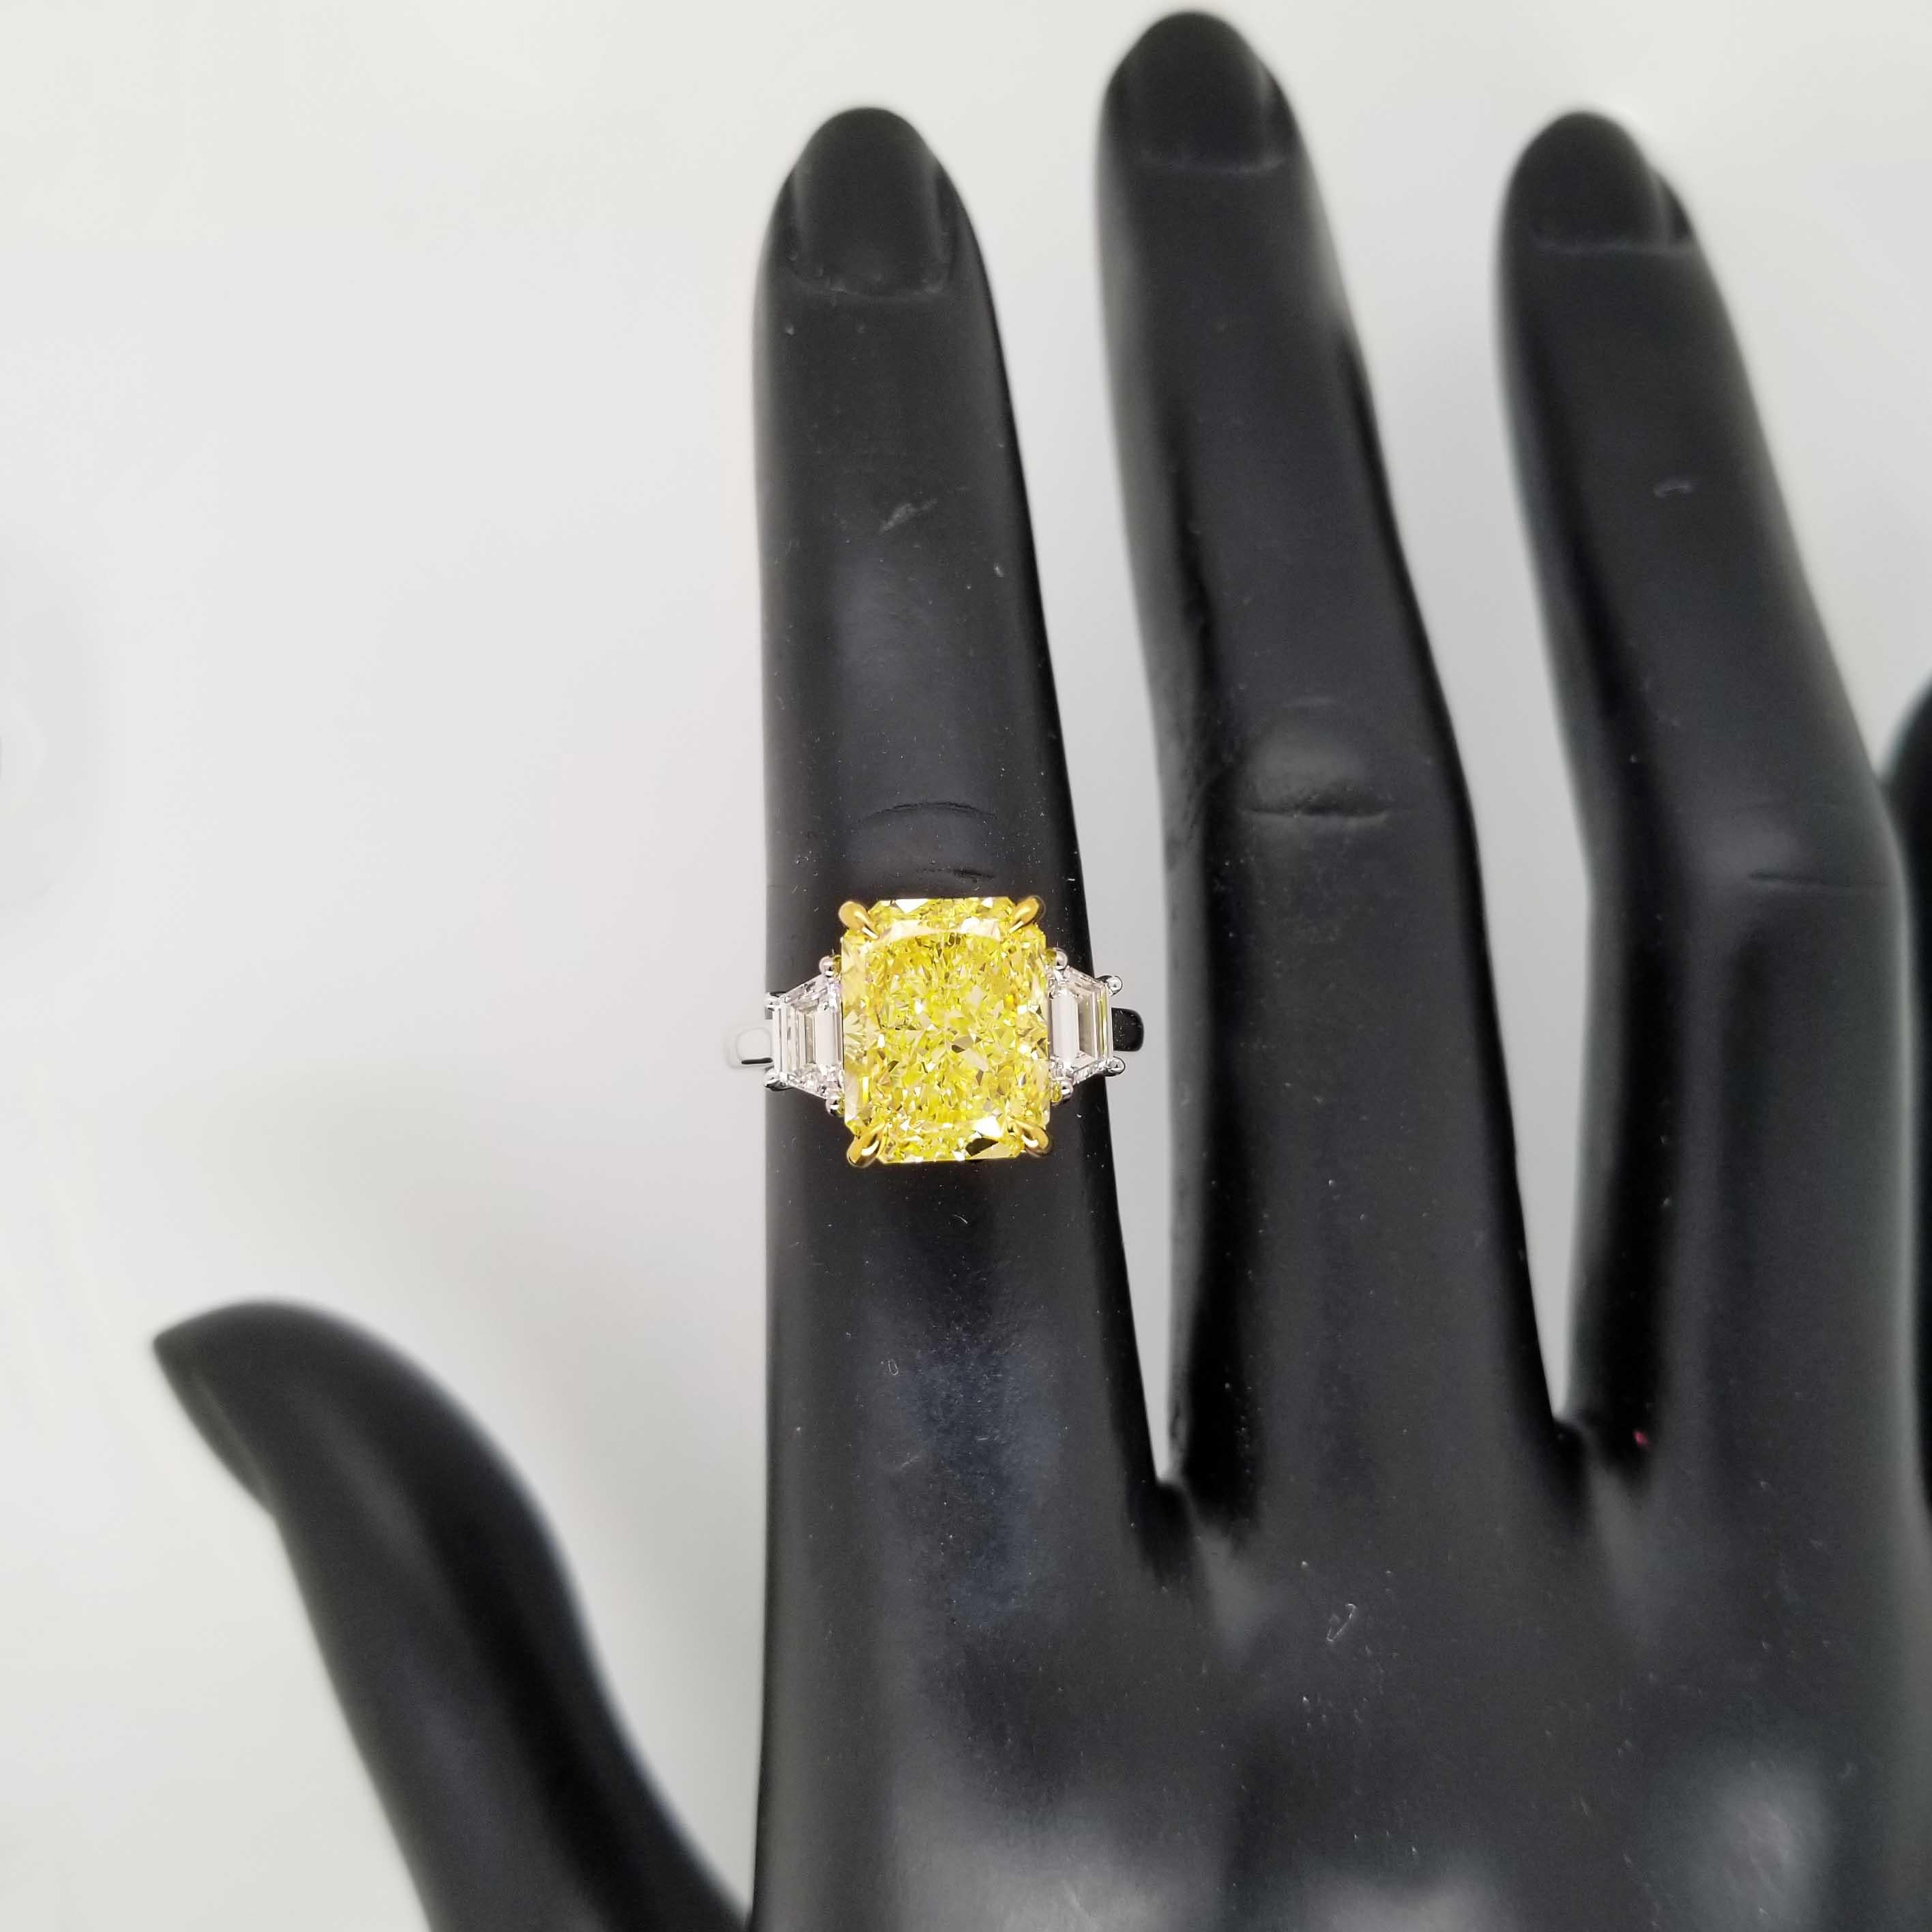 From SCARSELLI, this beautiful engagement ring features an over 5-carat Fancy Intense Yellow radiant cut diamond of VS2 clarity (see certificate picture for detailed stone's information) flanked by 2 trapezoids totaling 0.66ct (0.33 each). Handmade